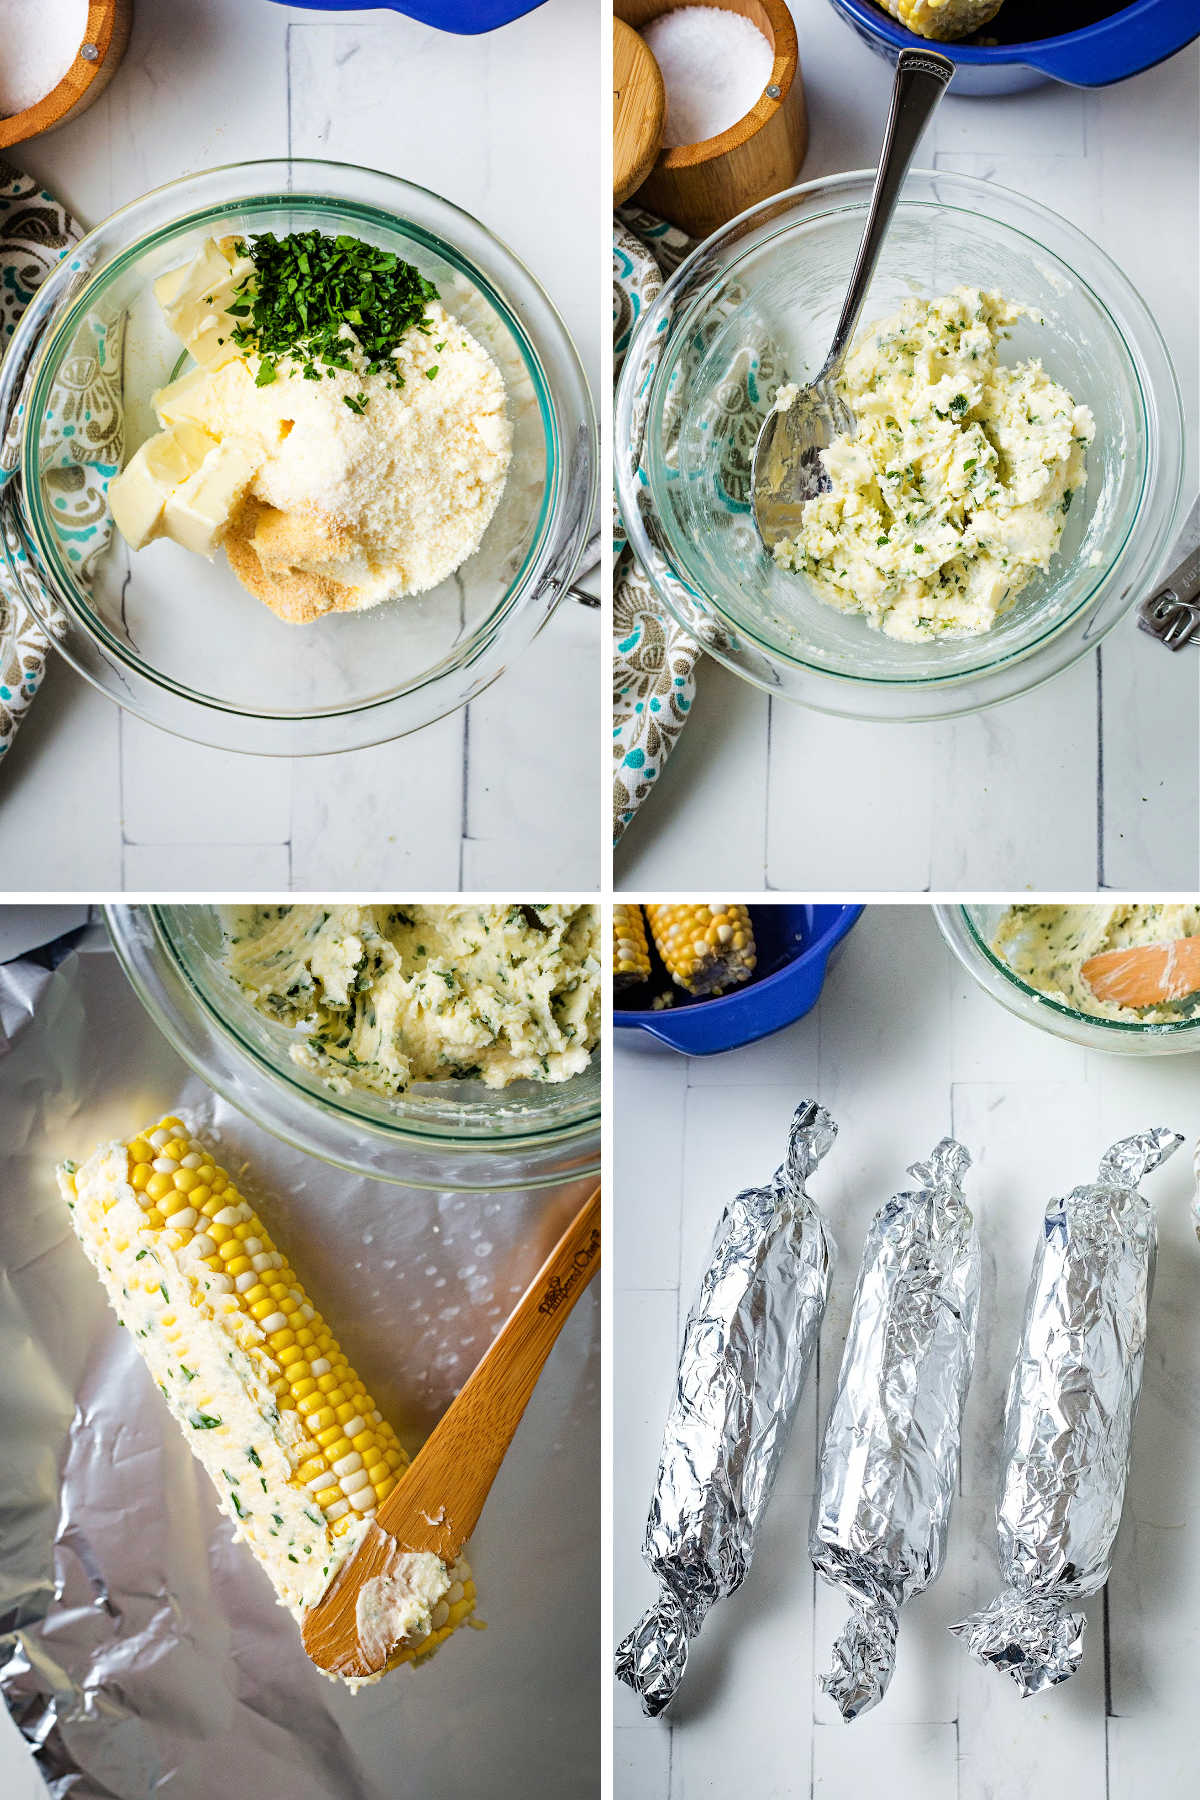 process steps for preparing corn for the grill: combine butter, parmesan cheese, chopped parsley in a bowl; spread on corn; wrap in aluminum foil.